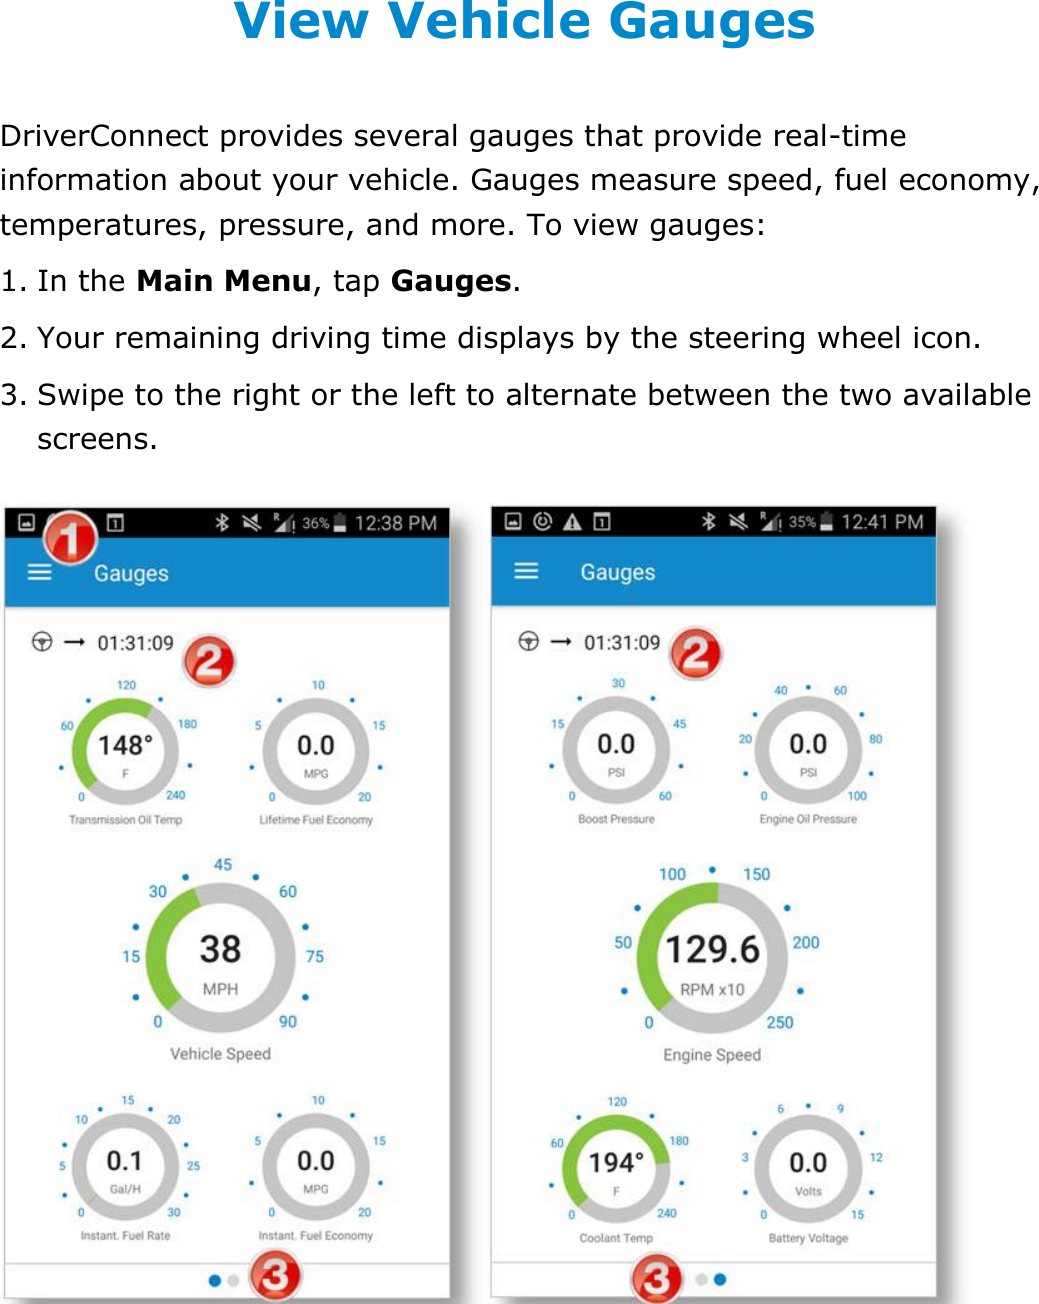 Manage Fuel Purchases DriverConnect User Guide  64 © 2017, Rand McNally, Inc. View Vehicle Gauges DriverConnect provides several gauges that provide real-time information about your vehicle. Gauges measure speed, fuel economy, temperatures, pressure, and more. To view gauges: 1. In the Main Menu, tap Gauges.  2. Your remaining driving time displays by the steering wheel icon. 3. Swipe to the right or the left to alternate between the two available screens. 